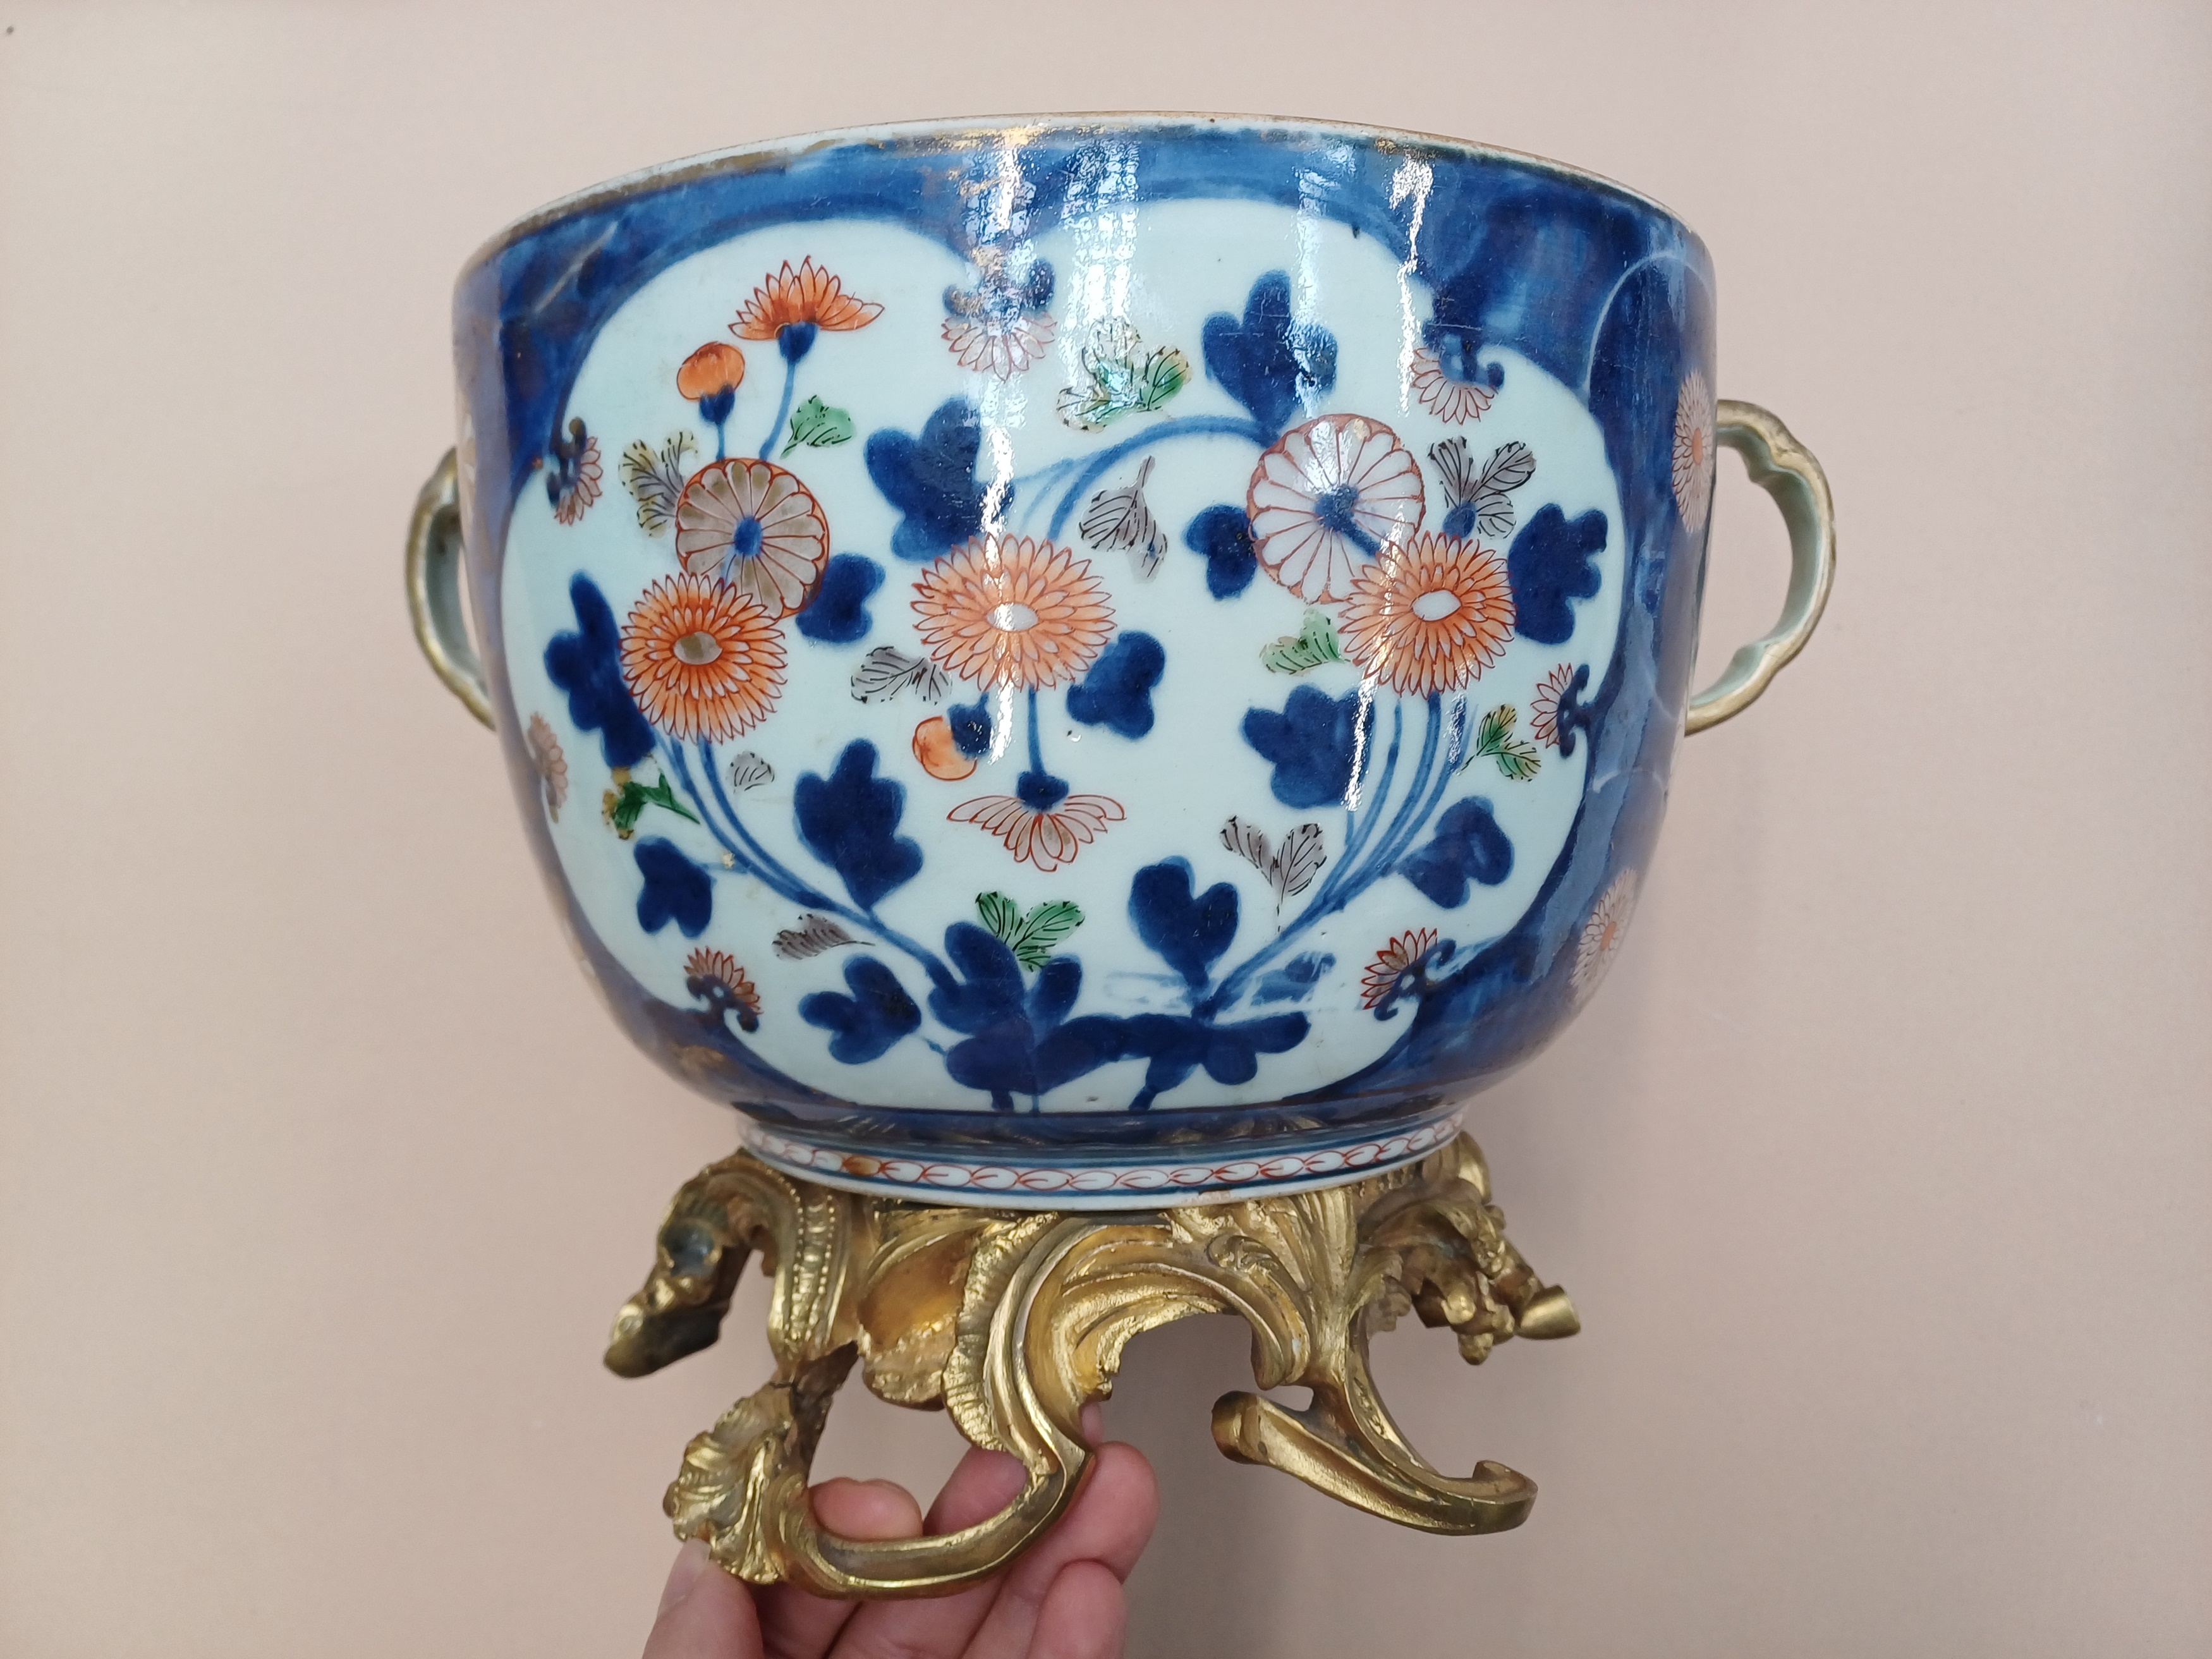 A JAPANESE IMARI POT, A FAMILLE-ROSE DISH, AND TWO JARDINIERES 十九至二十世紀 伊萬里罐，粉彩盤盆一對 - Image 15 of 17